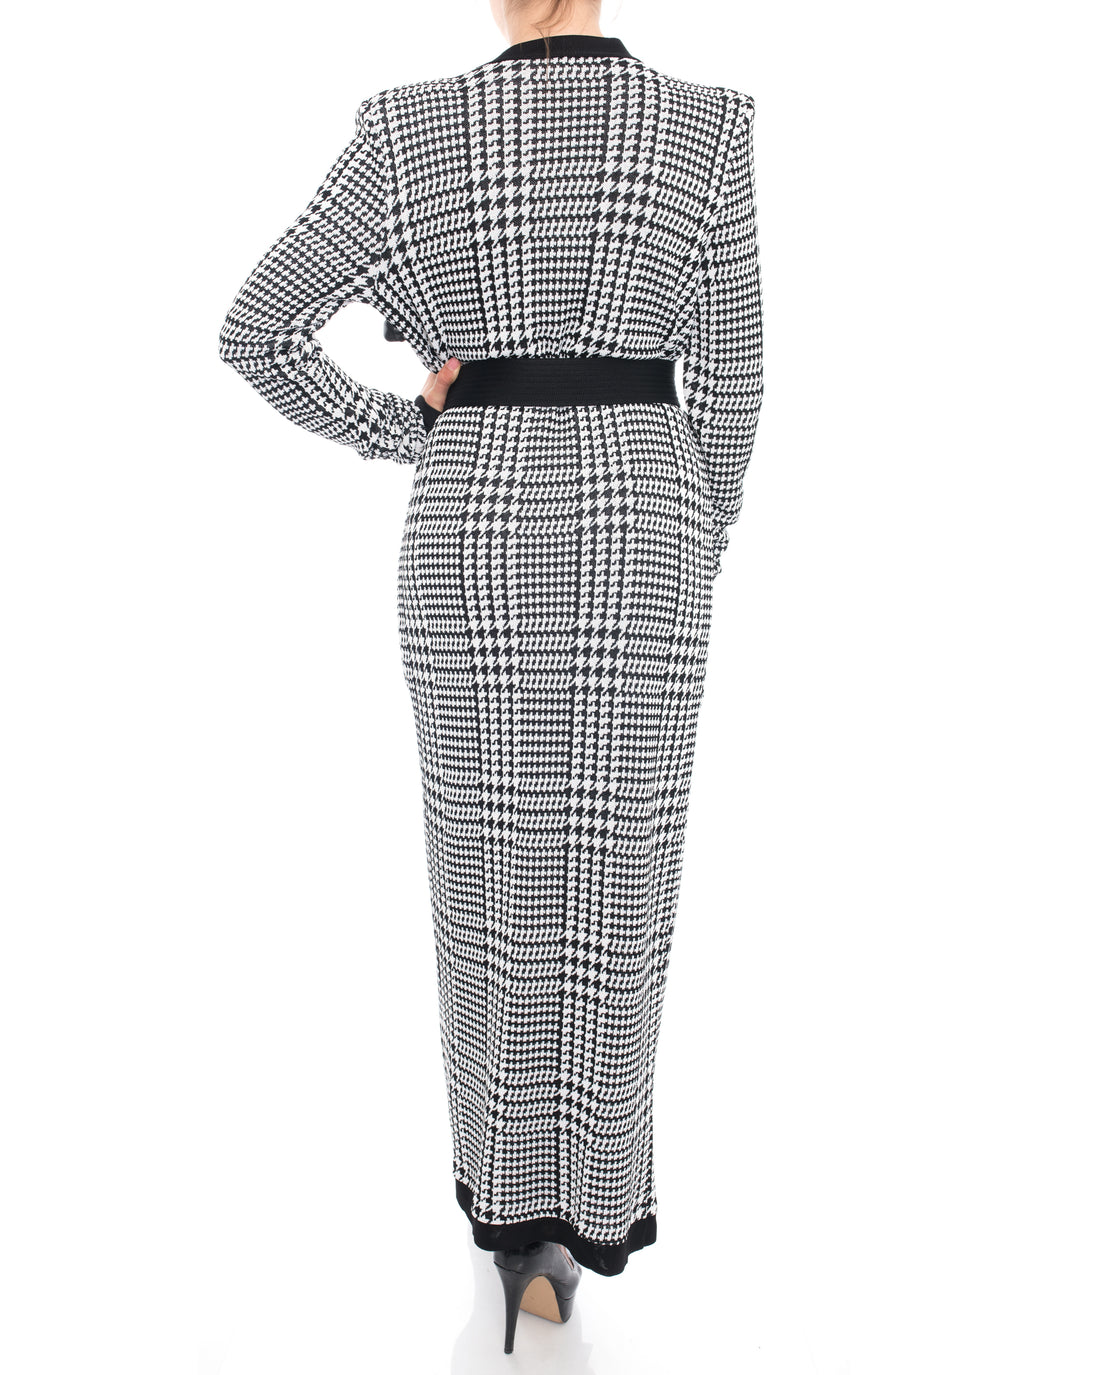 Balmain Pre-Fall 2017 Black White Houndstooth Sweater Gown - 10